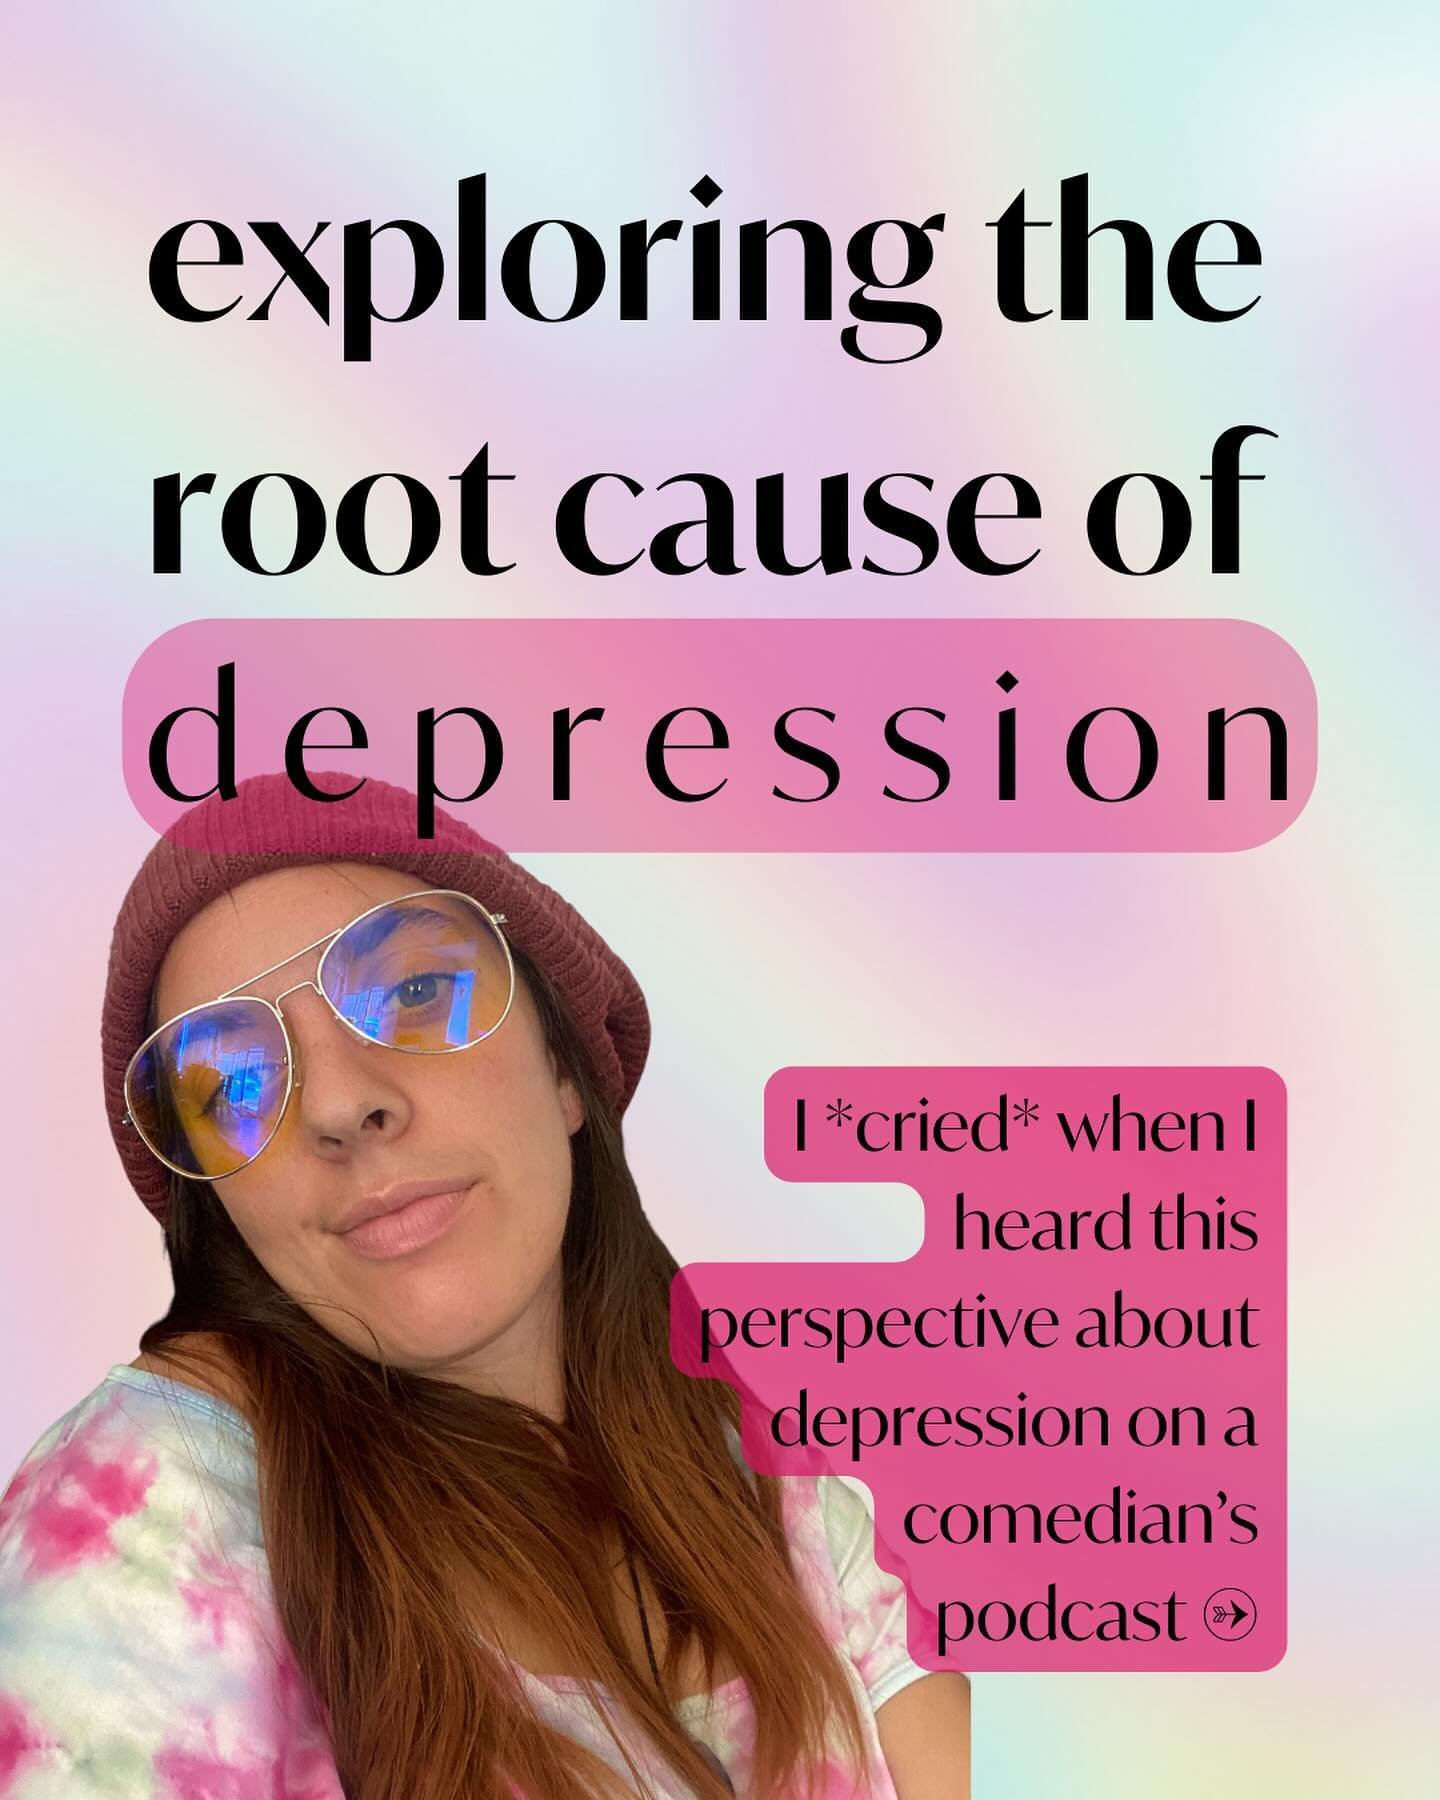 (vid from @theovon on slide 5 goes for about 2 mins &mdash; the depression component is mentioned towards the end)

I CRIED WHEN I HEARD THIS.

Because it makes sense.
Because I care about what brings on depression.
Because I believe in my bones that